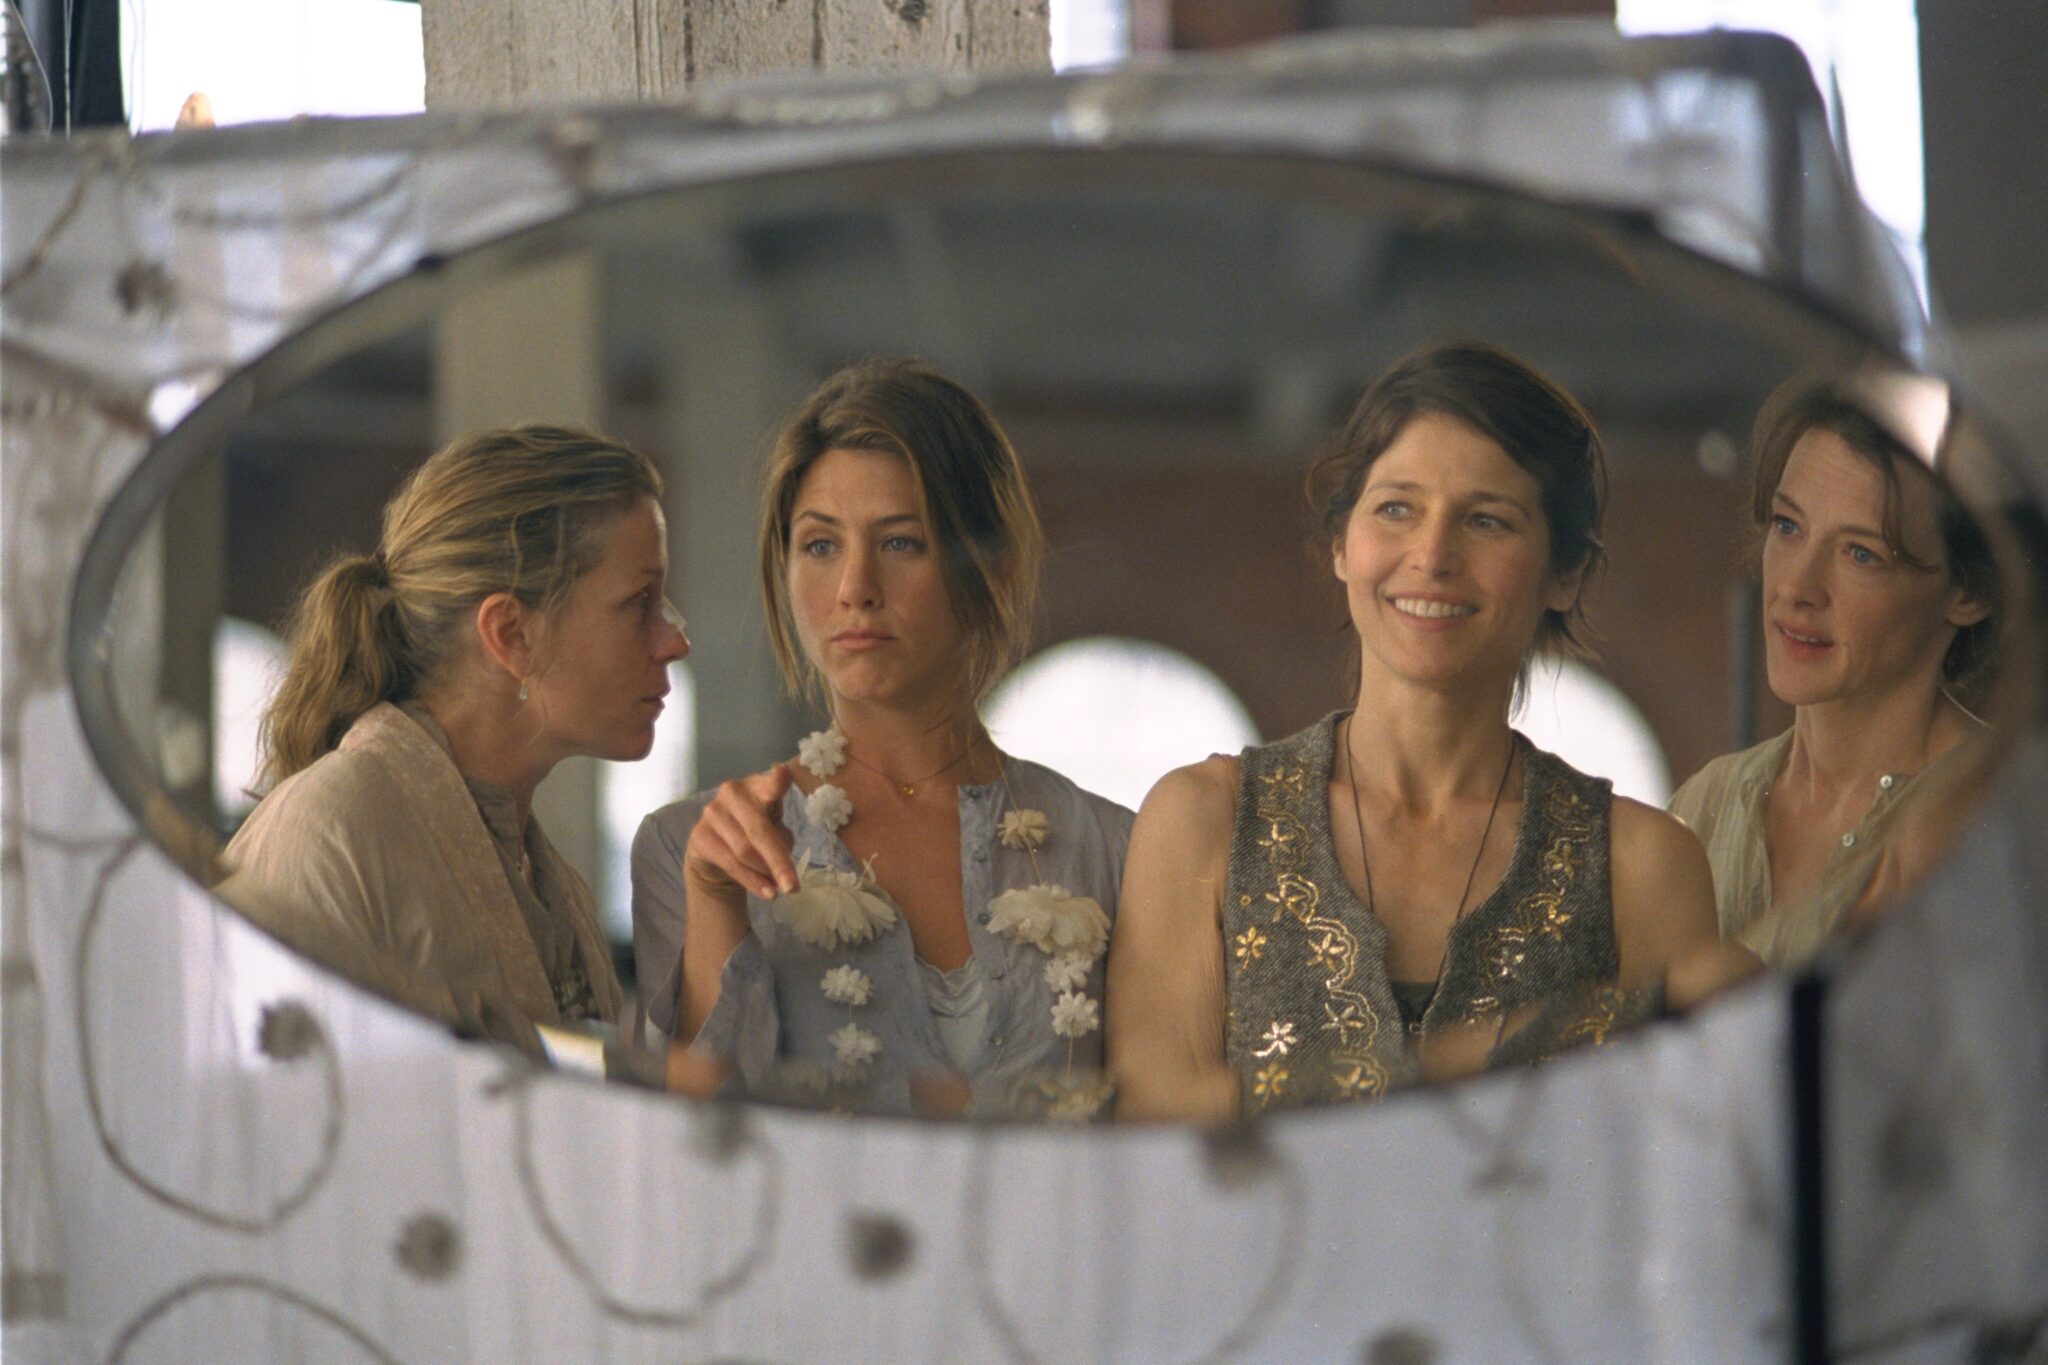 Four women stand in front of a round mirror chatting